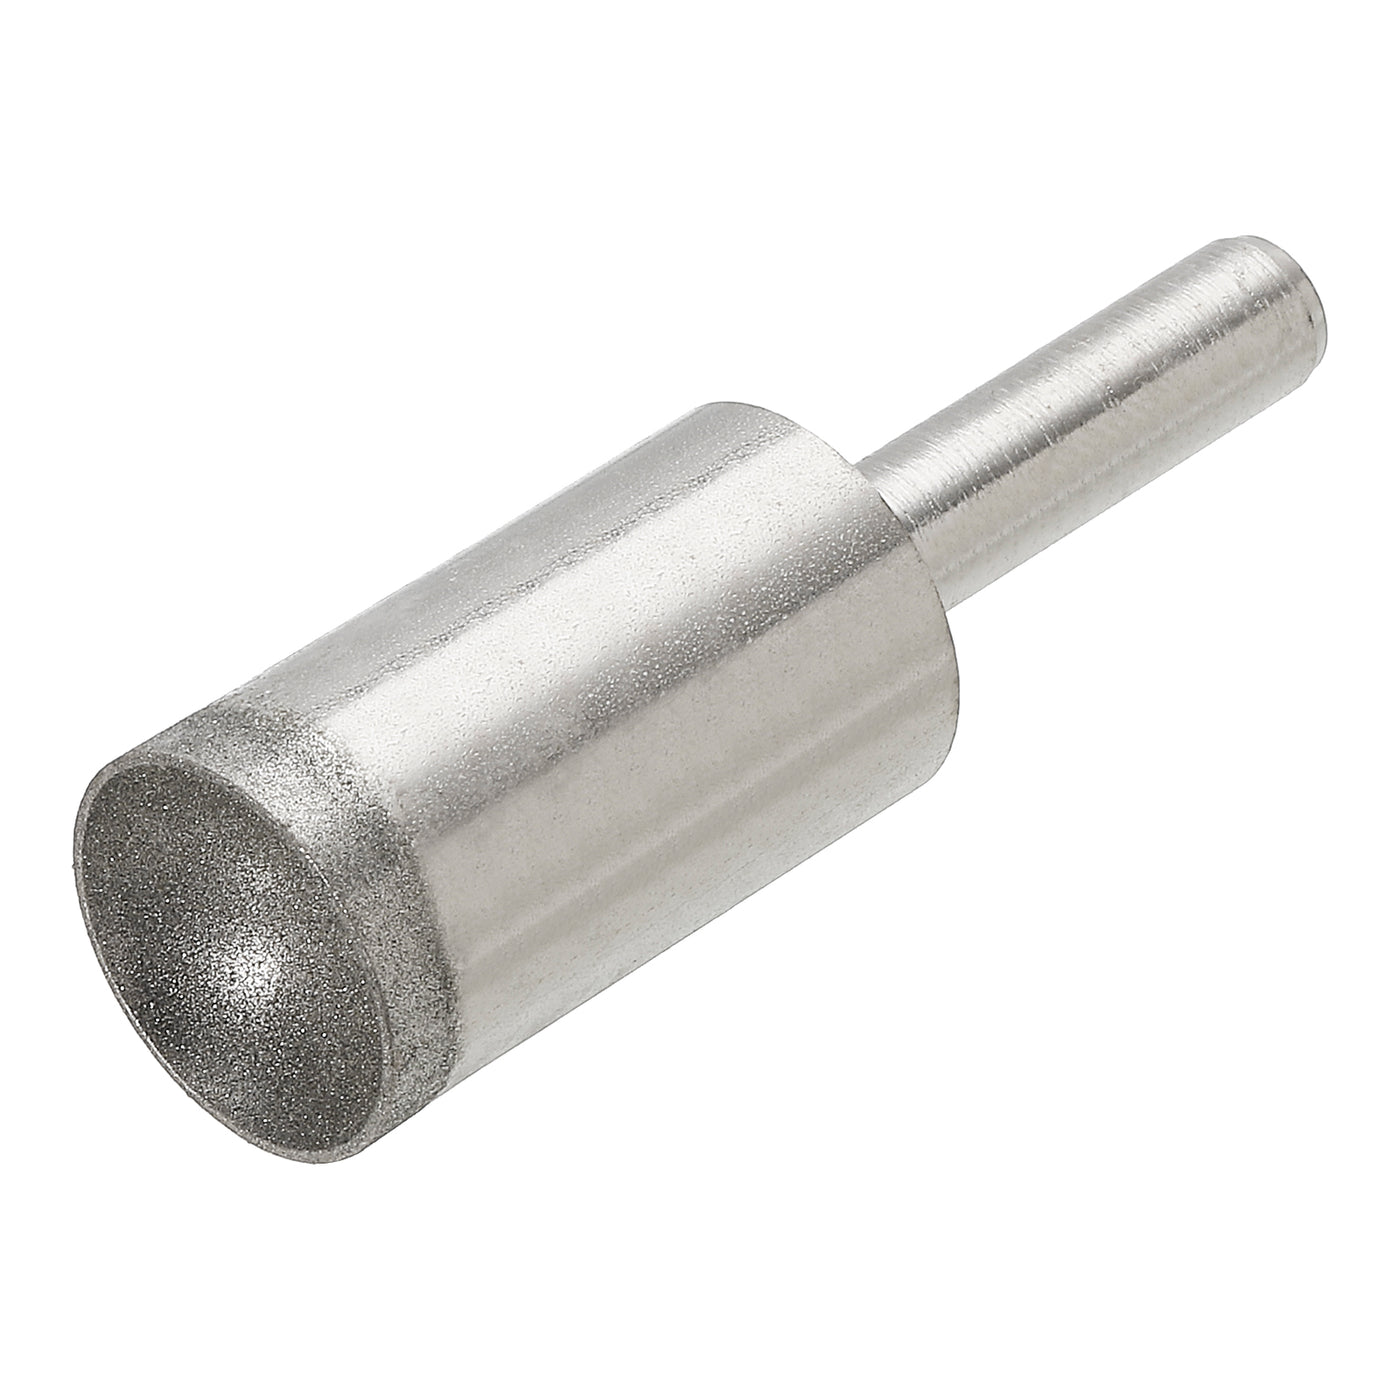 uxcell Uxcell 15mm 600 Grits Diamond Mounted Point Spherical Concave Head Bead Grinding Bit